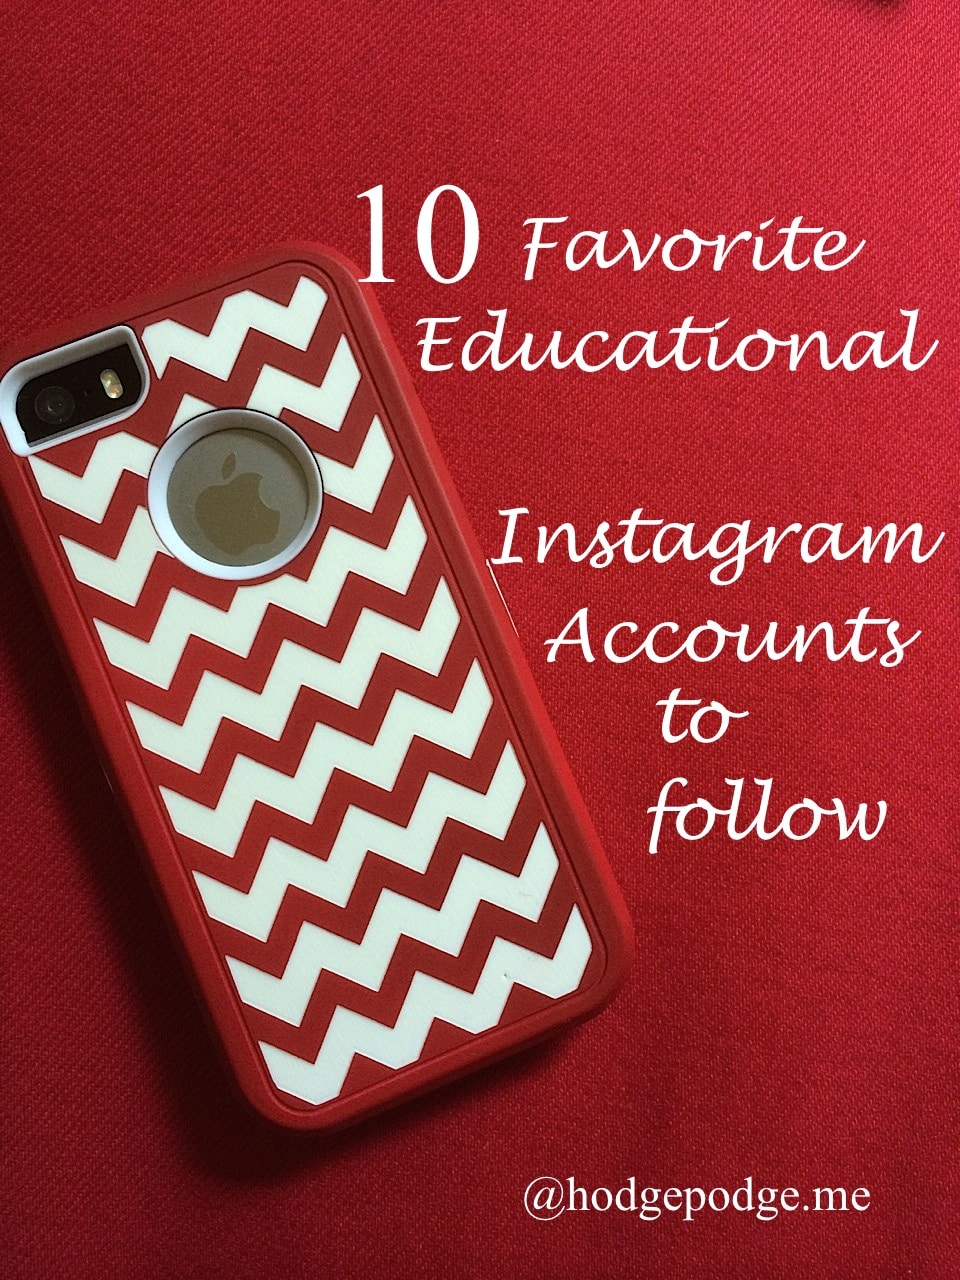 10 Educational Instagram Accounts to Follow